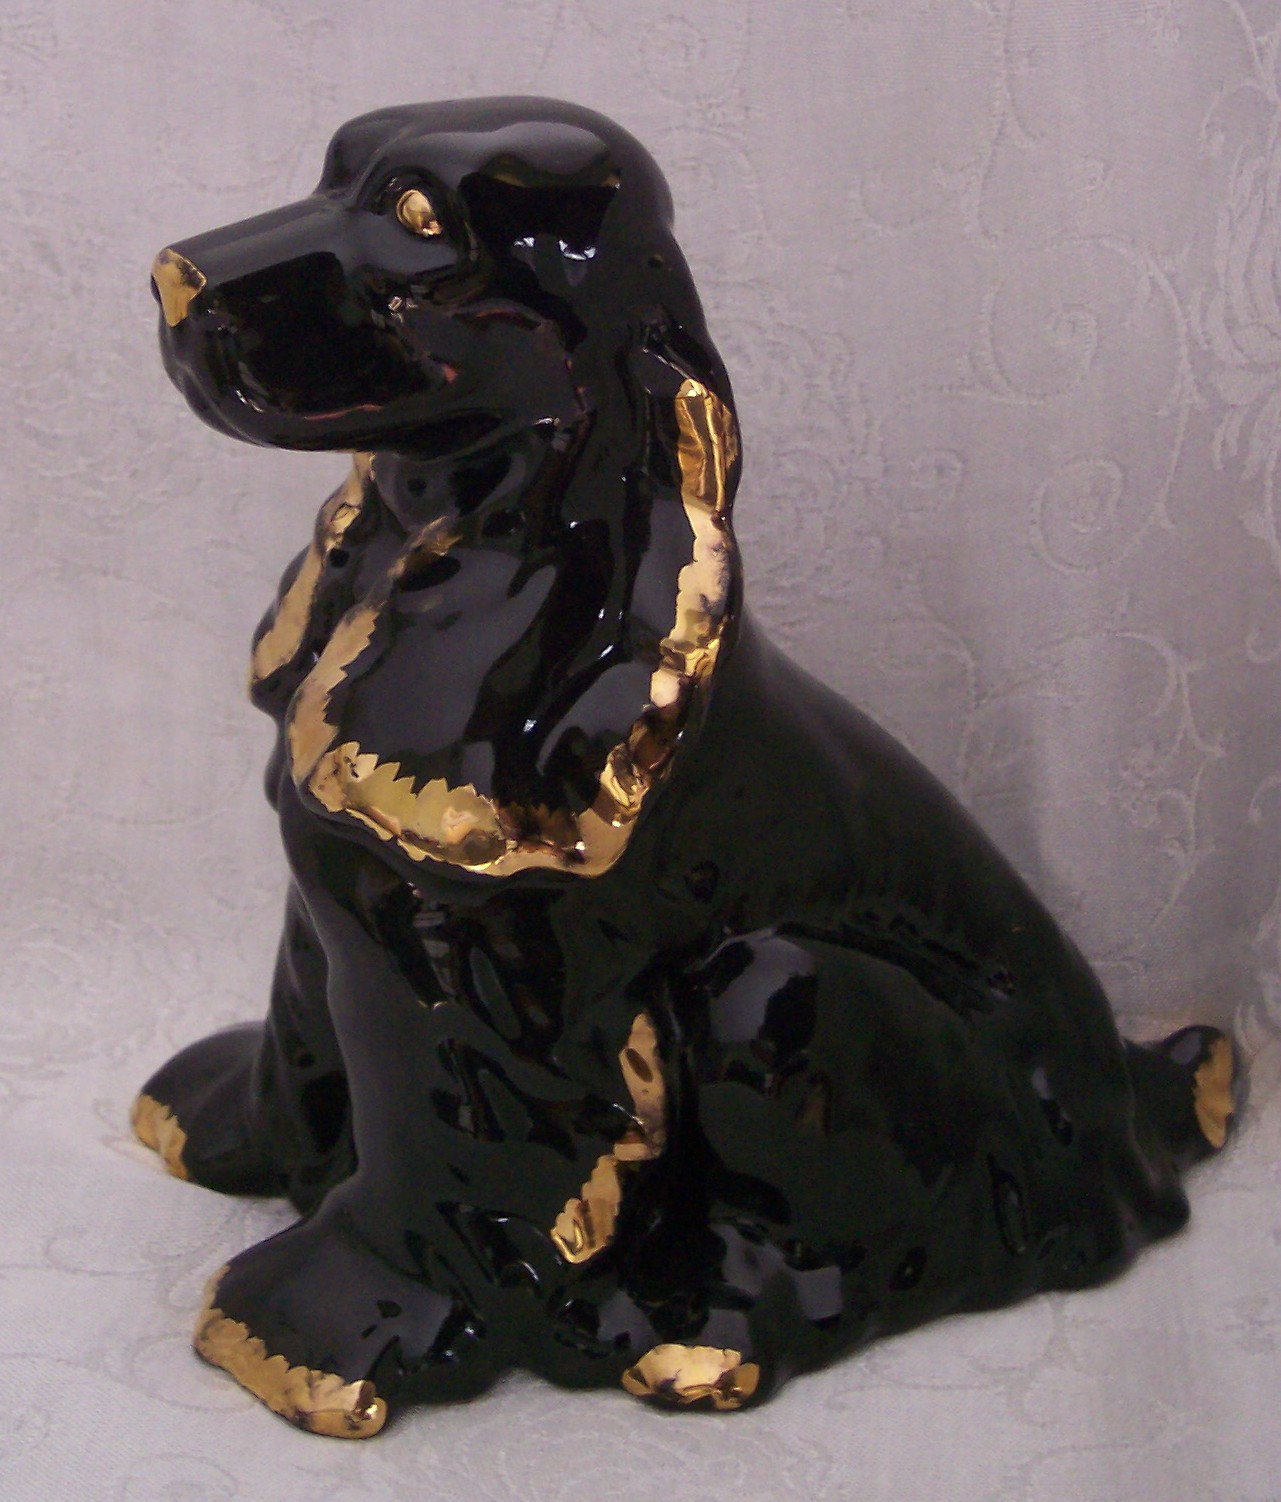 royal haeger vase r1752 of cameron clay cocker spaniel figurine statue and 50 similar items intended for metlox mccoy black cocker spaniel figurine gold trim1